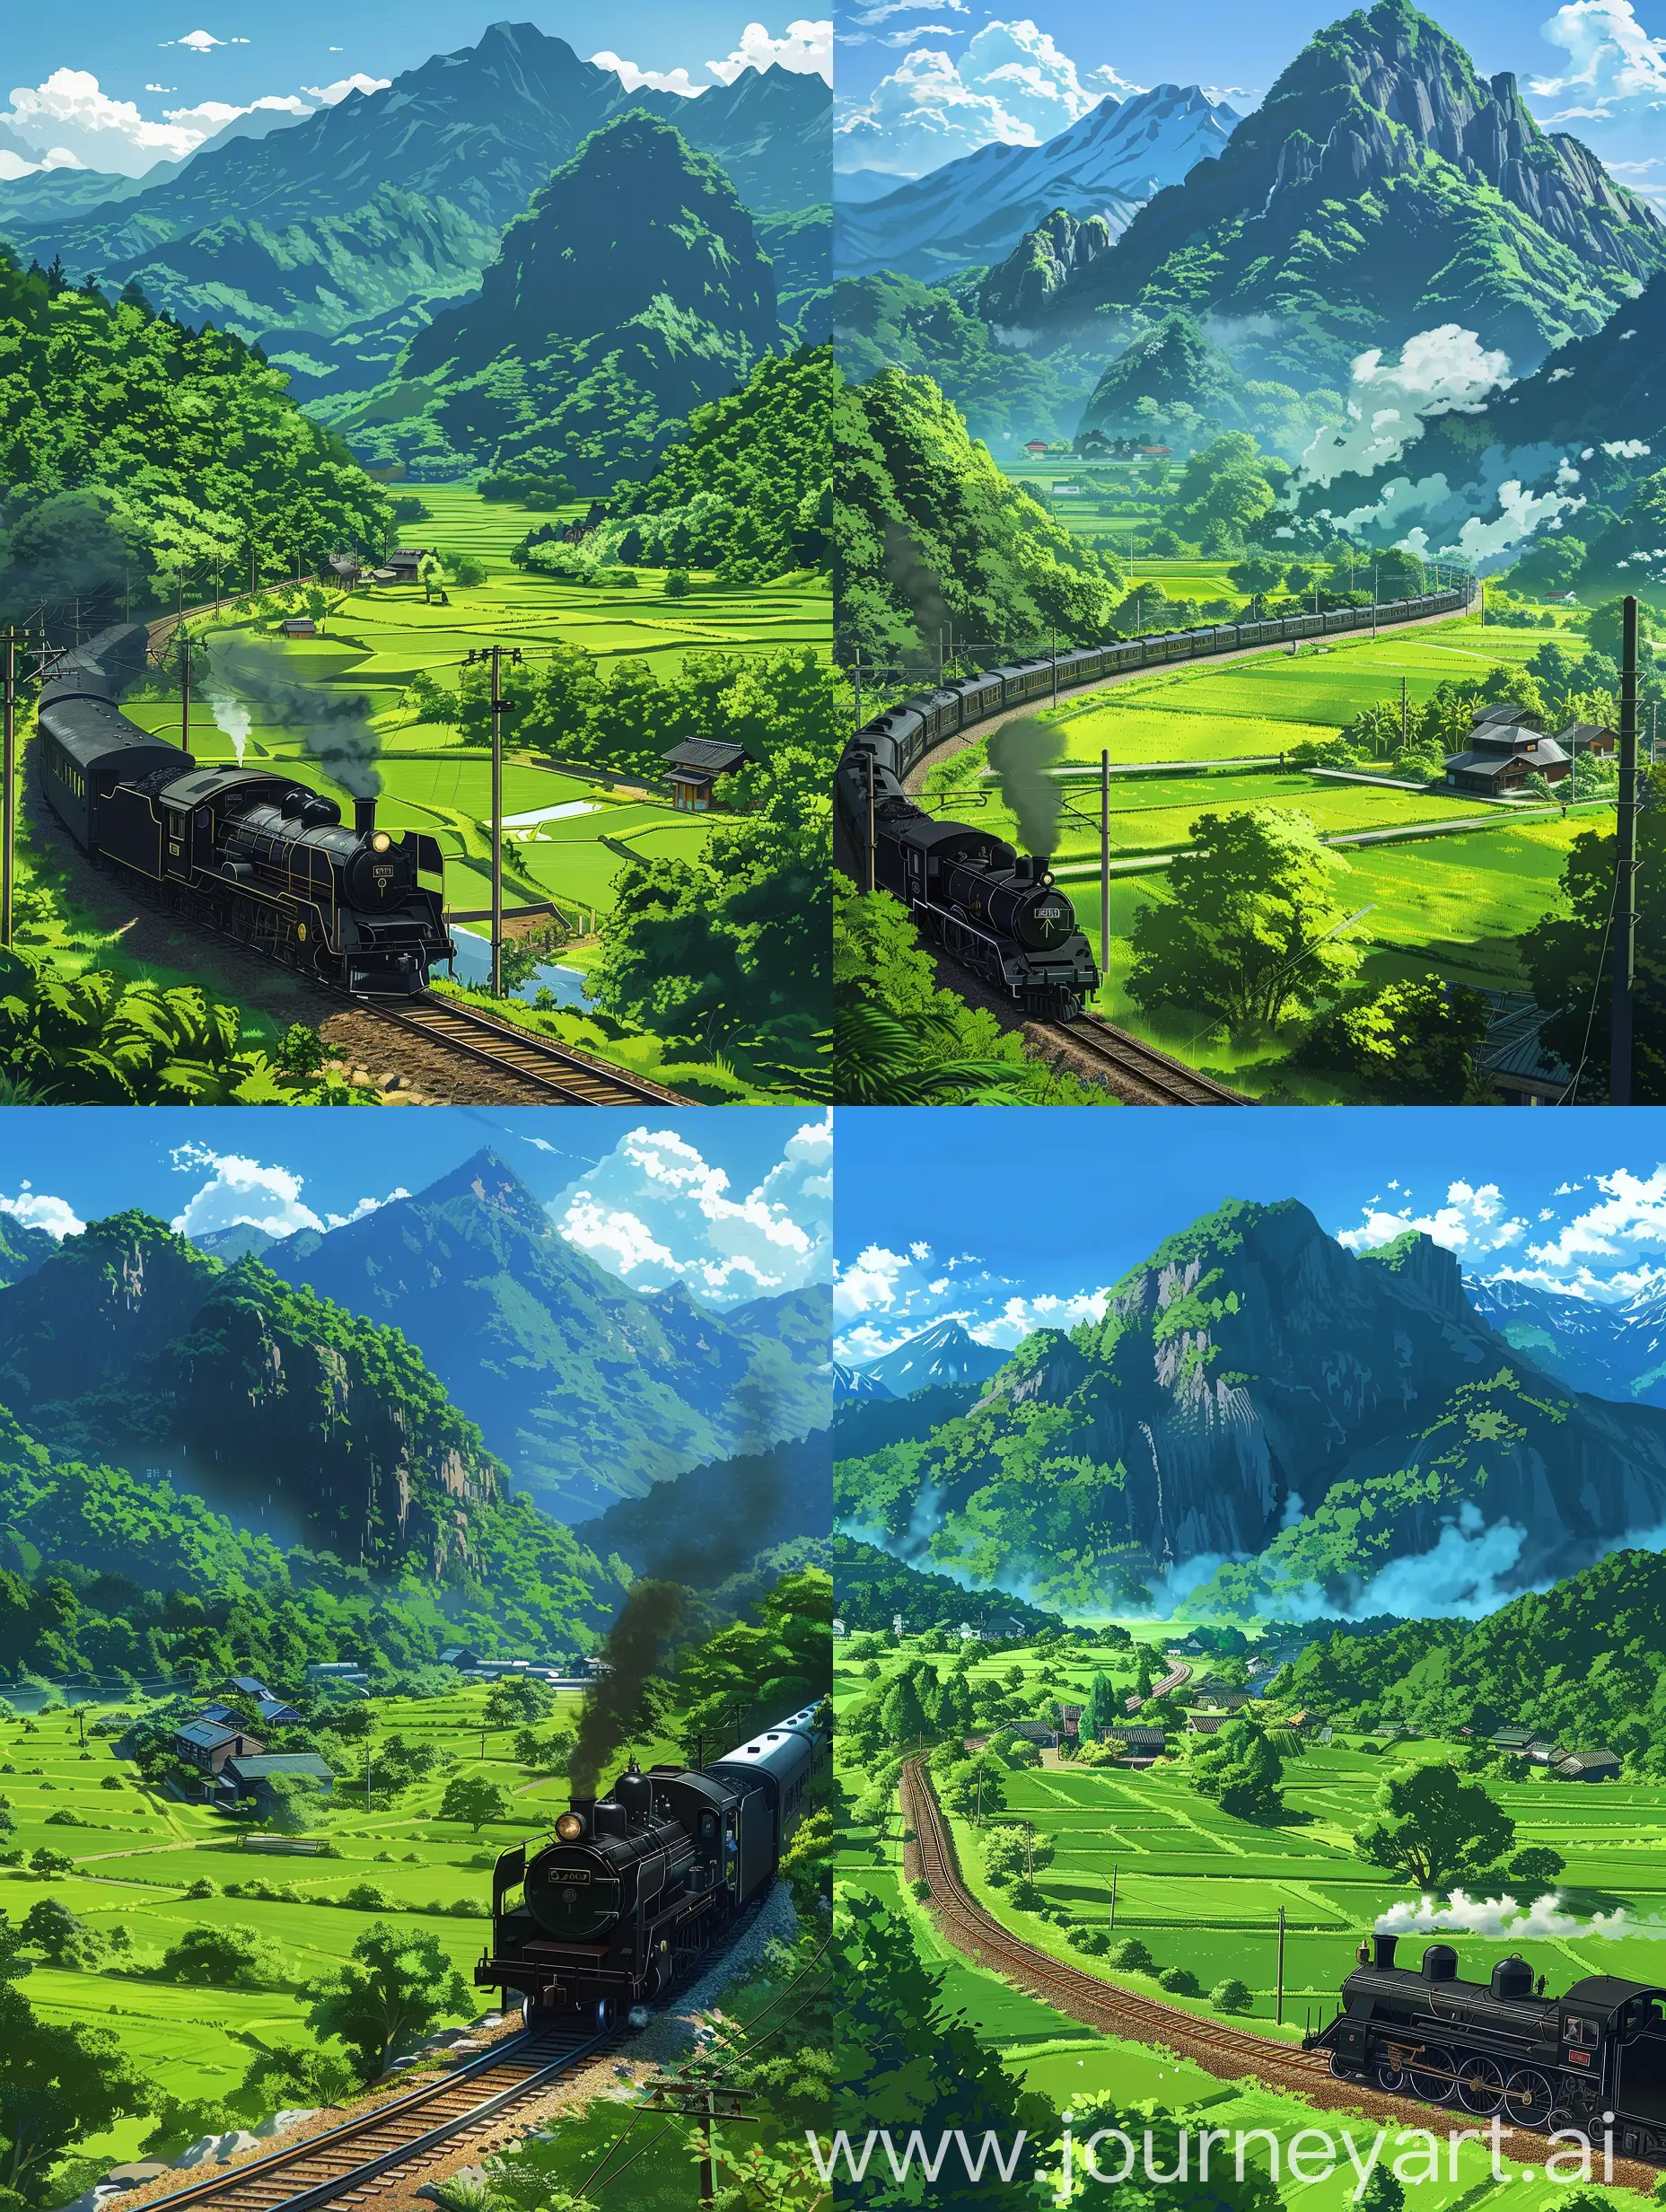 Beautiful anime style scenery,inspired by demon slayer anime style,a picturesque landscape with  greenery, a train moving along tracks, and mountains in the background. The style appears animated or painted, showcasing vibrant colors and a serene environment:

In the foreground, a black steam train is prominently displayed, moving along tracks that cut through a green field. Nearby, there are small structures, possibly houses or buildings. As we move toward the middle ground, lush green fields and trees spread out toward the base of large mountains. The background features towering mountains covered with greenery under a clear blue sky with a few clouds. Overall, the image evokes a peaceful and idyllic vibe. 🌿🚂🏔️

